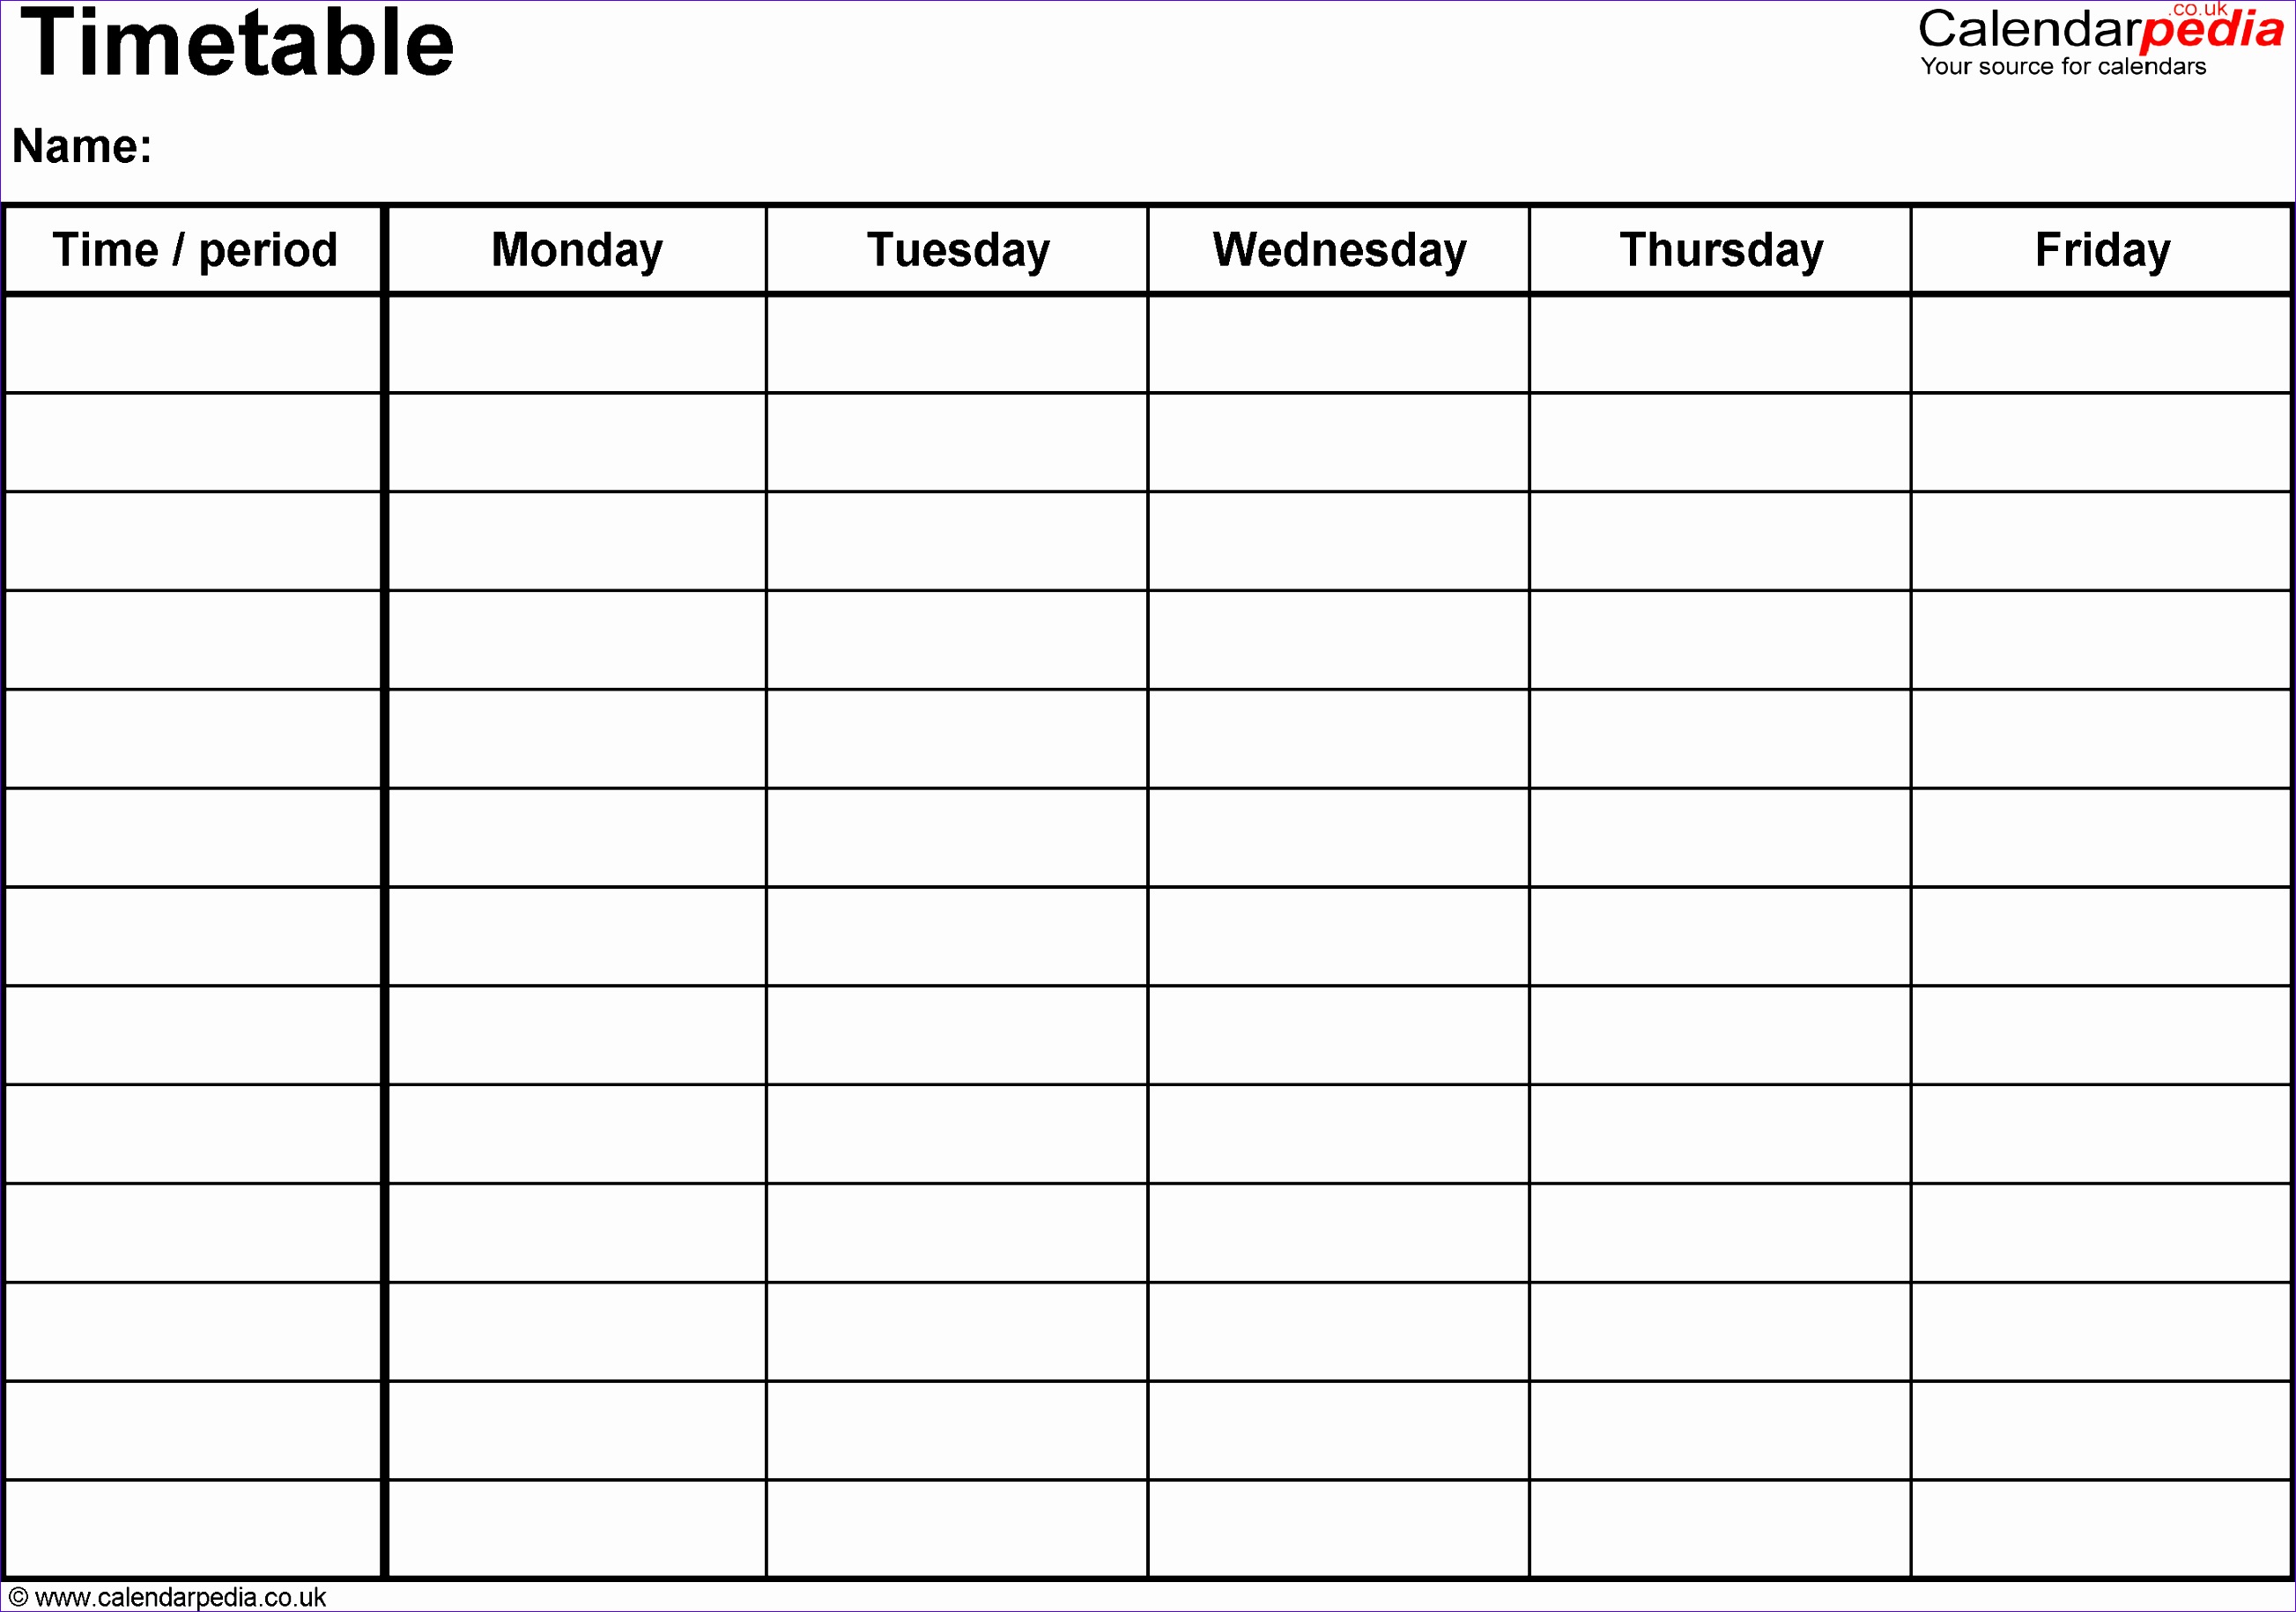 timetable monday friday